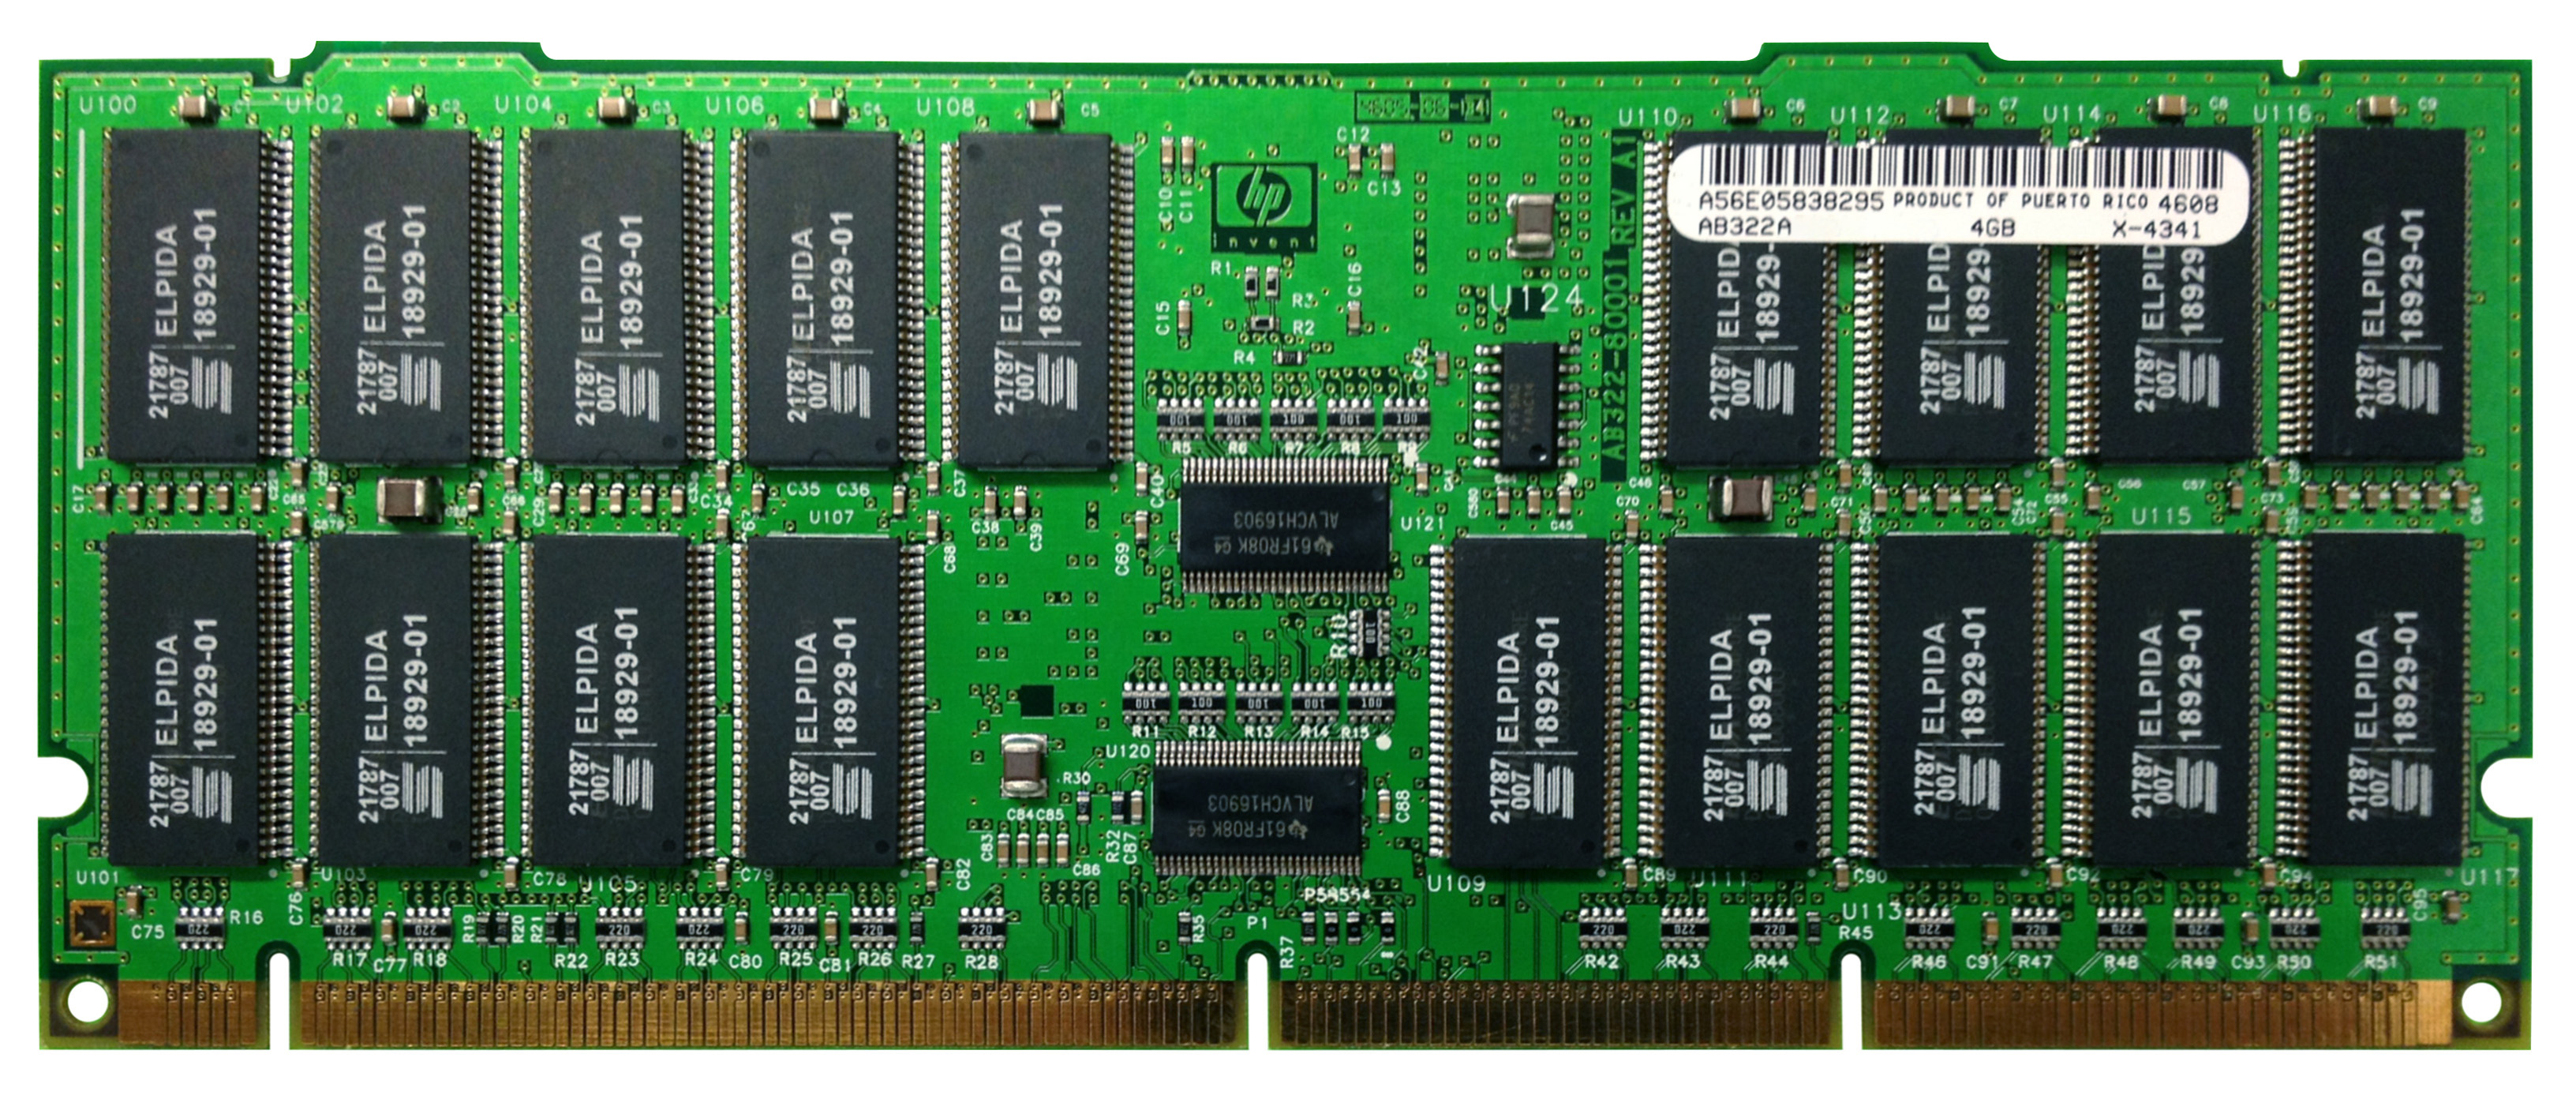 AB322-69001 HP 4GB PC133 133MHz ECC Registered High-Density 278-Pin SyncDRAM DIMM Memory Module for rp8420/rp7410/rx7620 Server